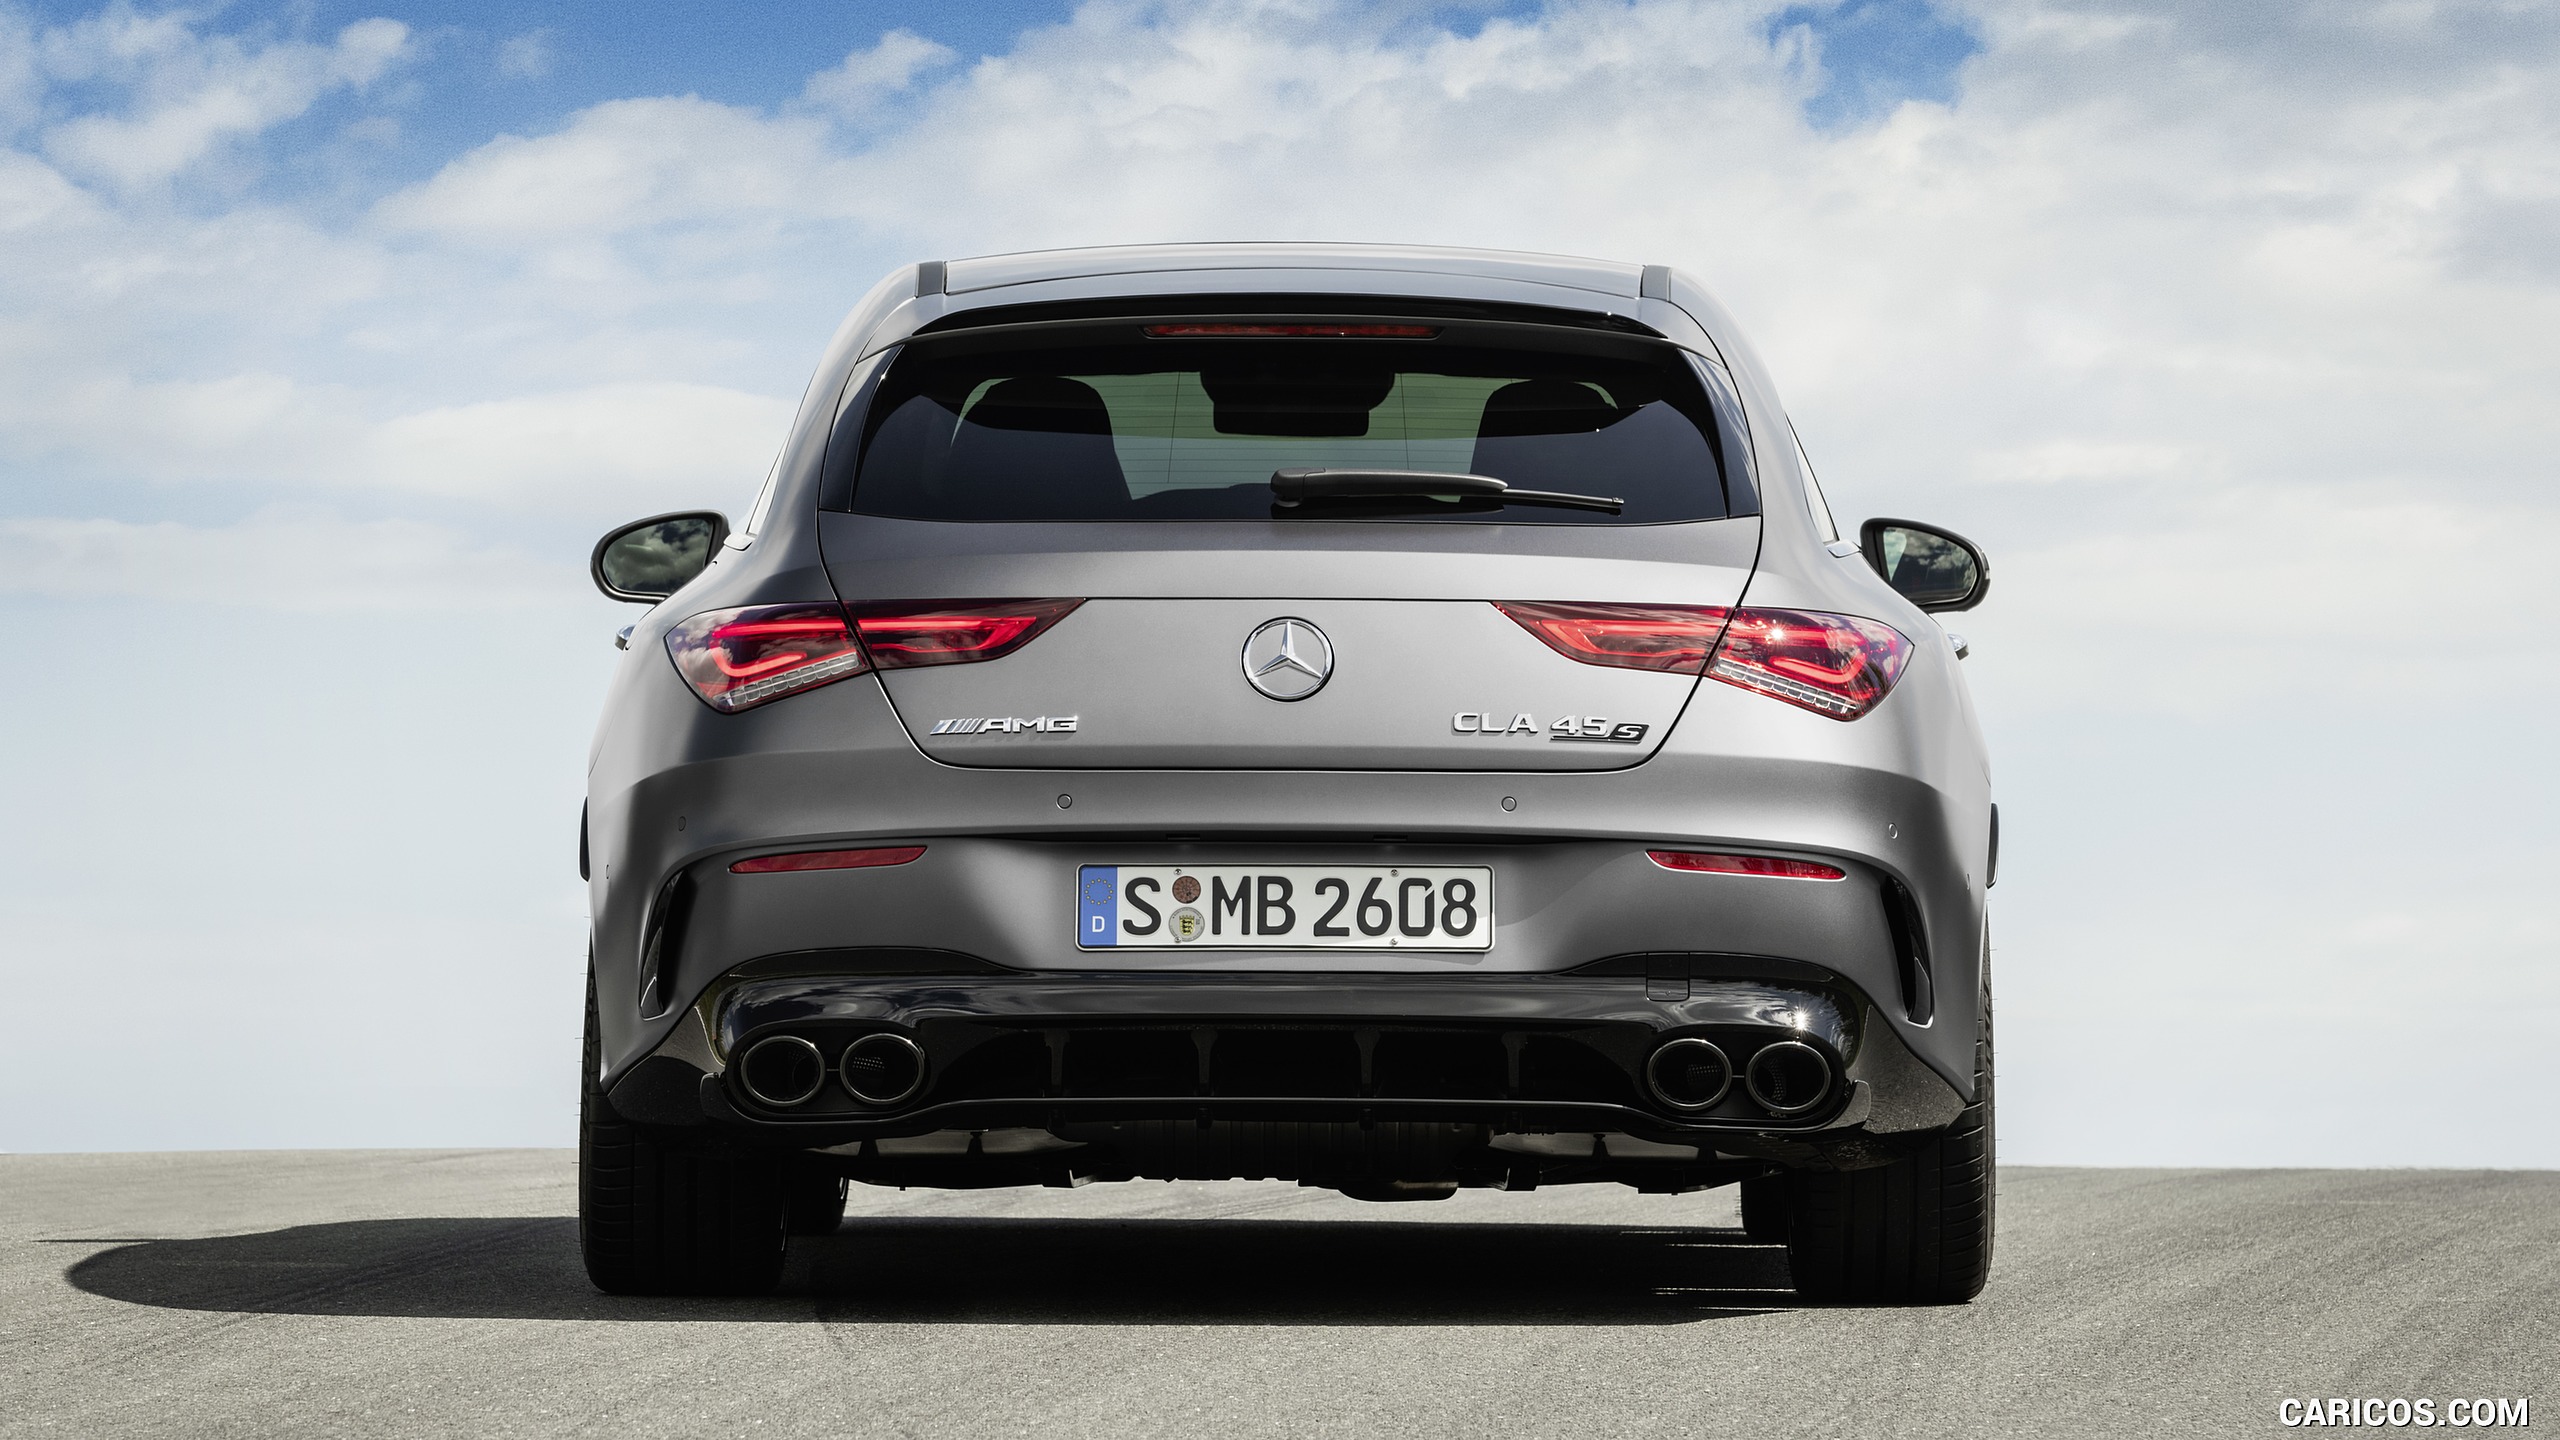 2020 Mercedes-AMG CLA 45 S 4MATIC+ Shooting Brake - Rear, #19 of 35